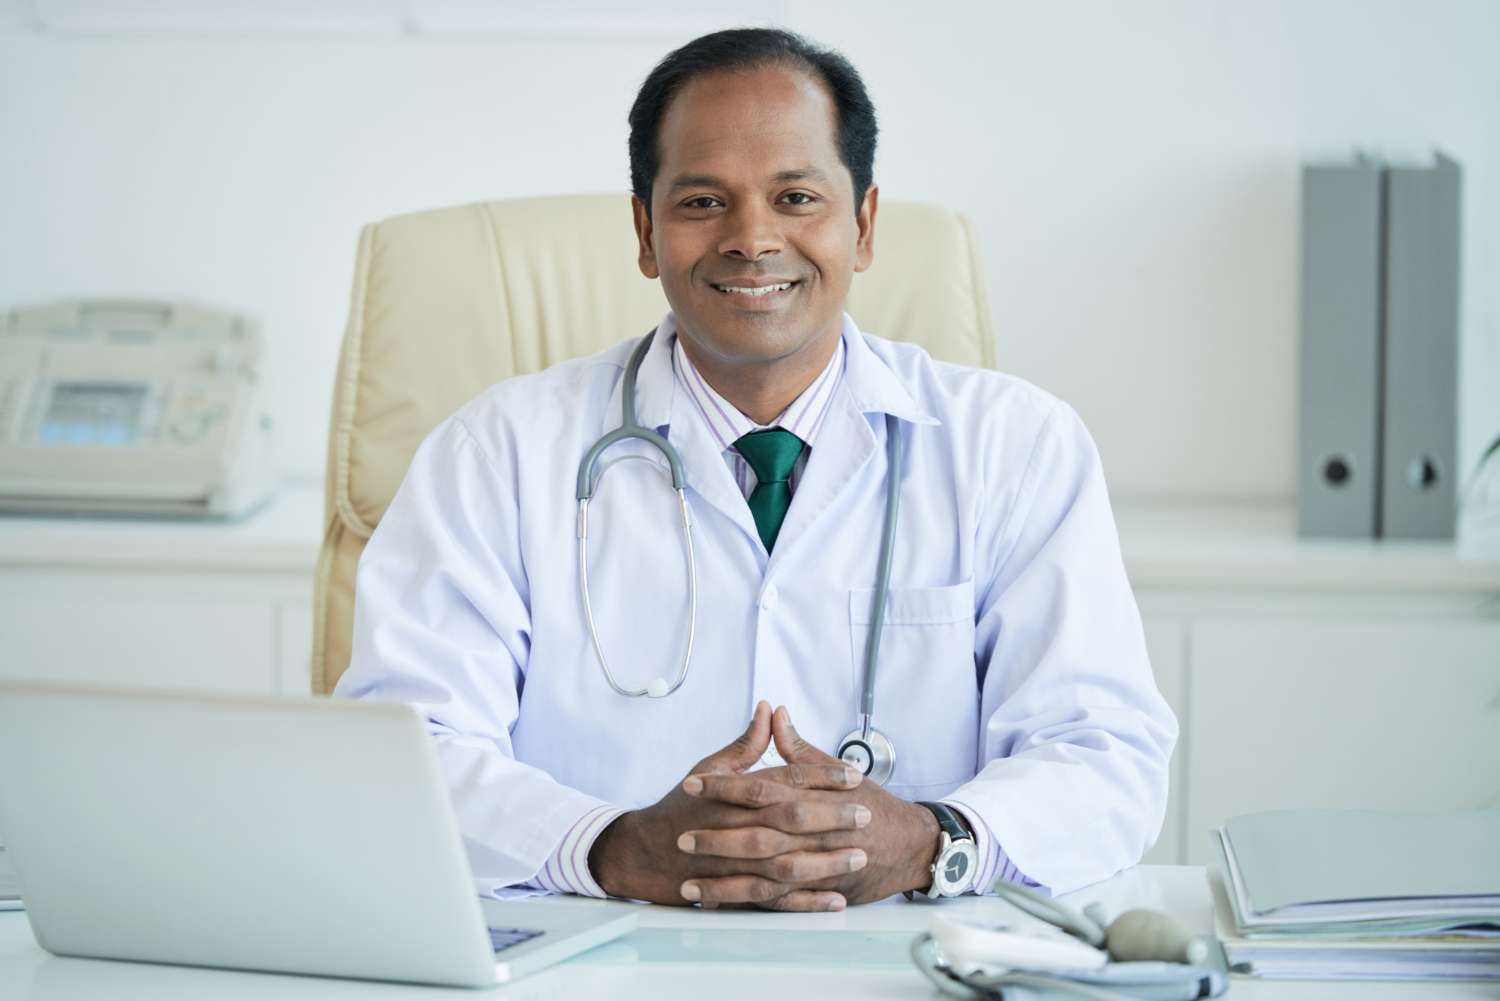 An Indian doctor